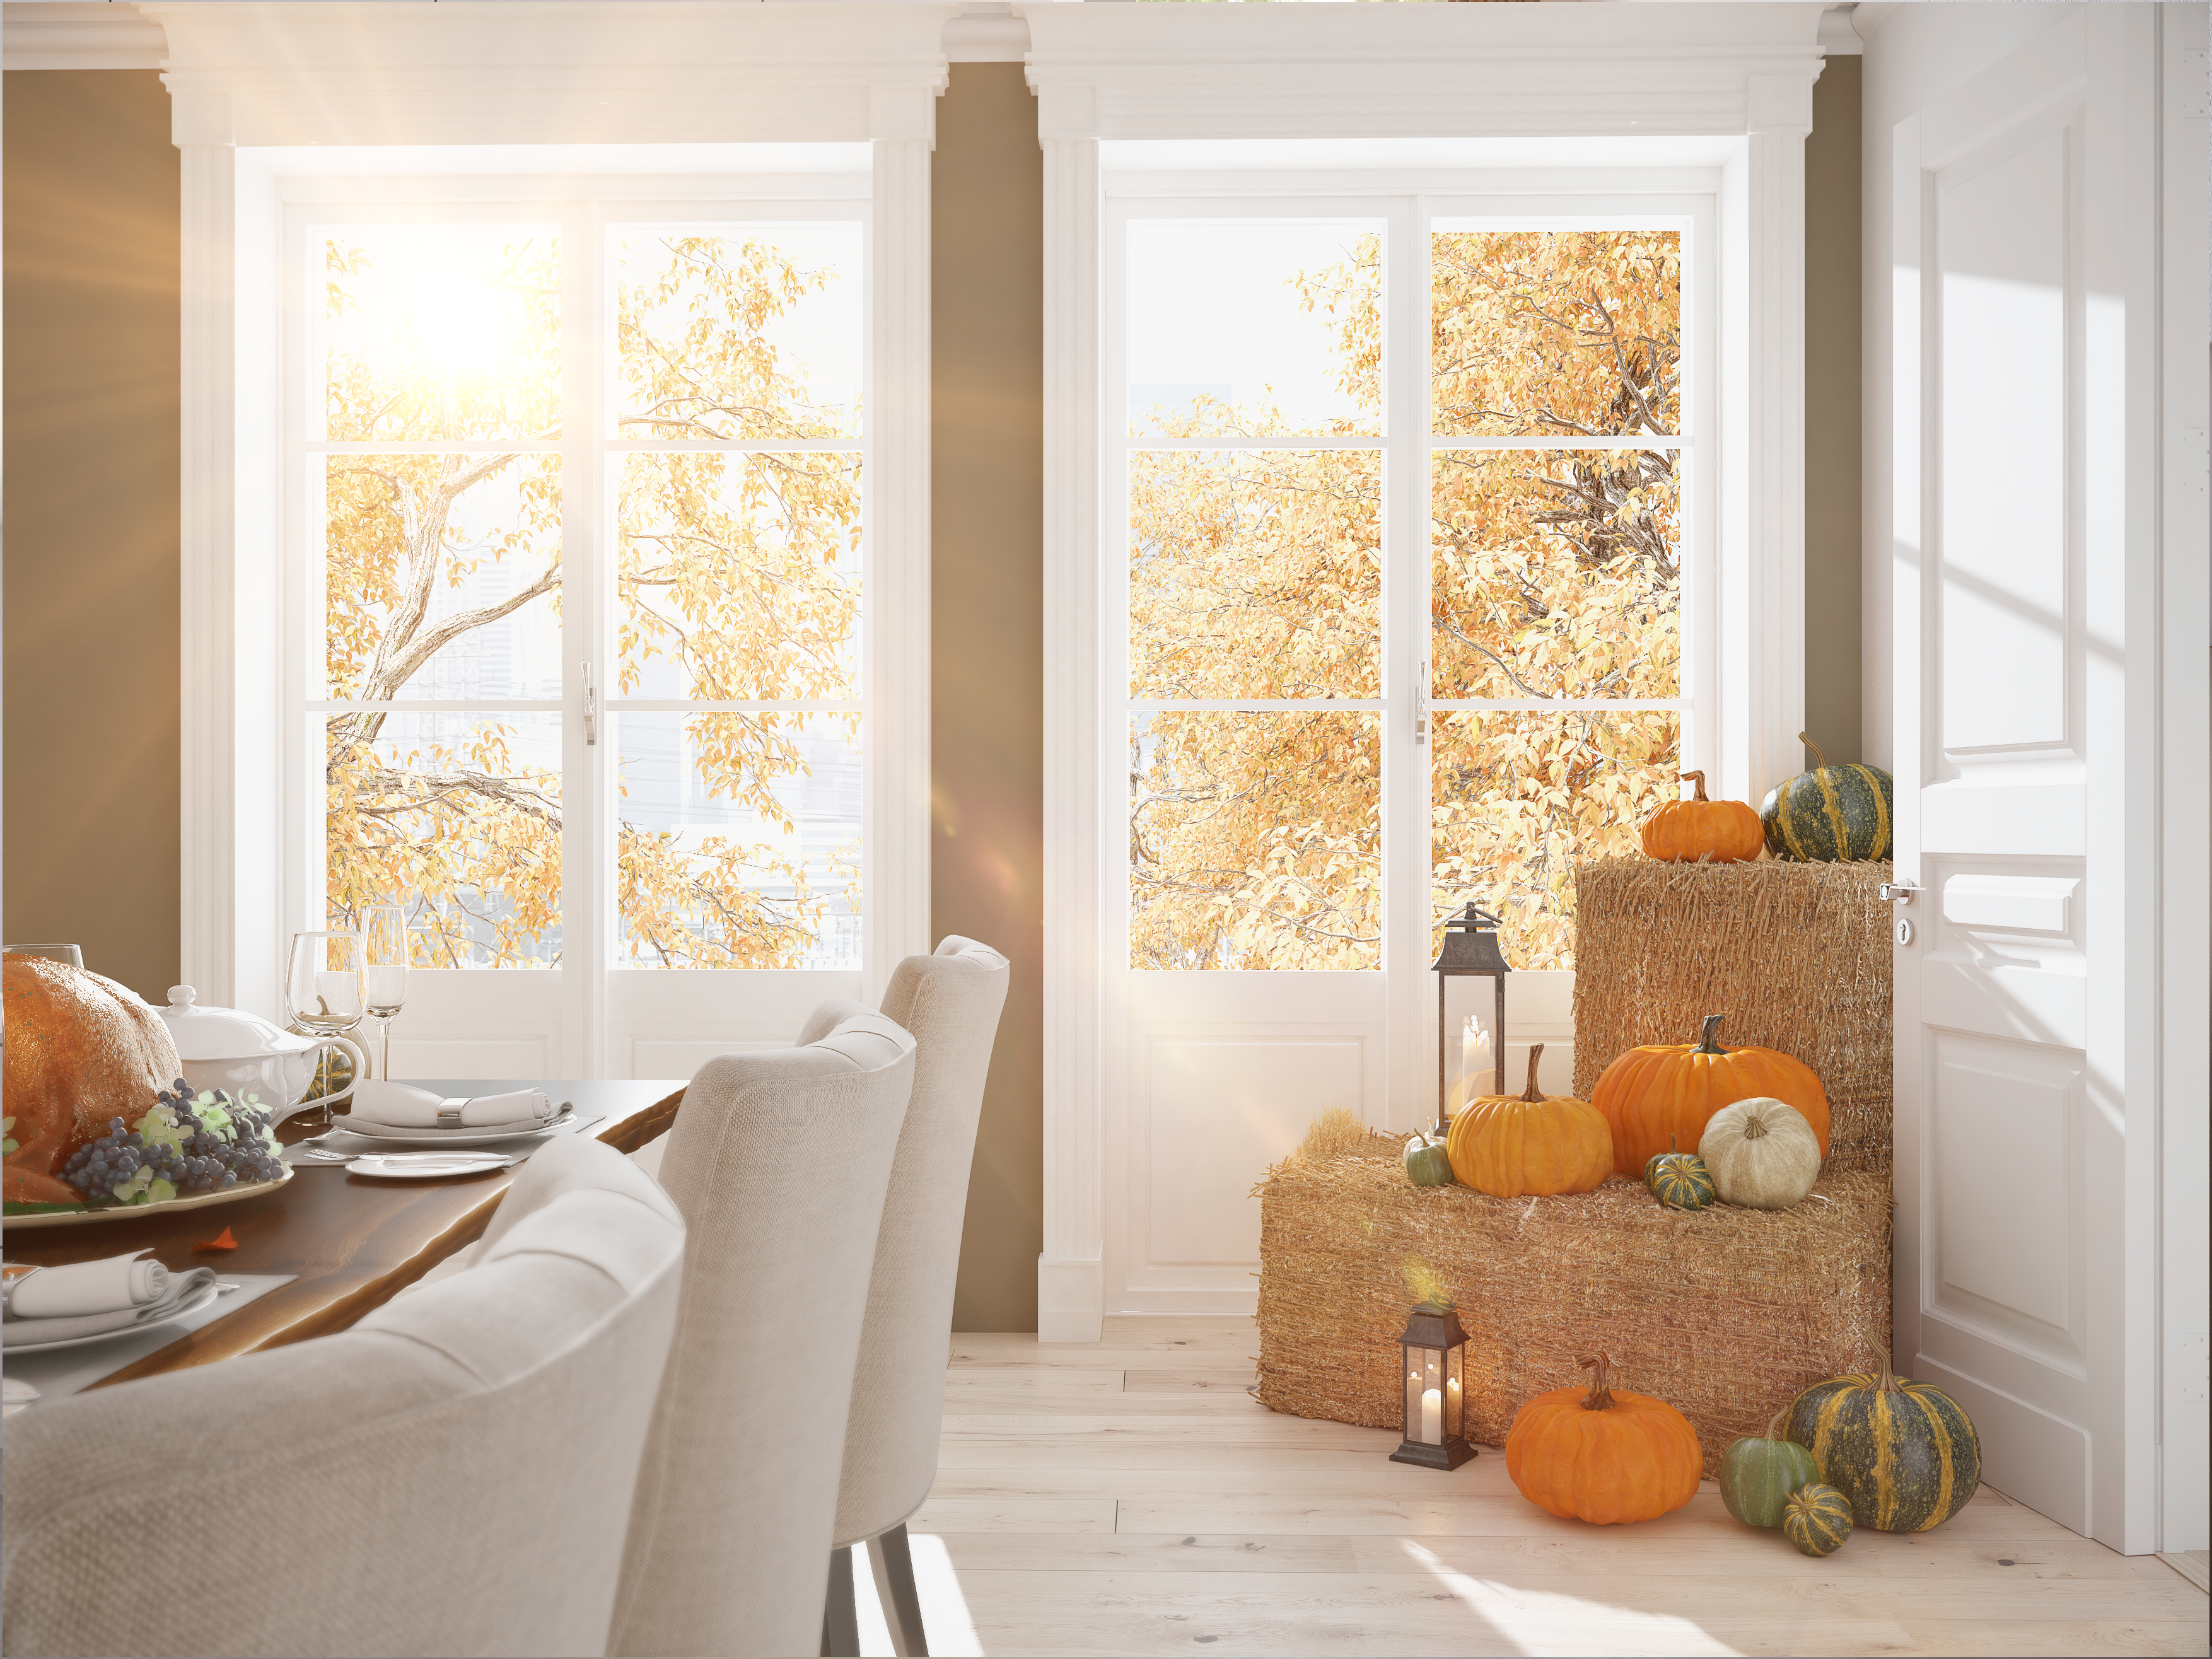 A home decorated for fall.